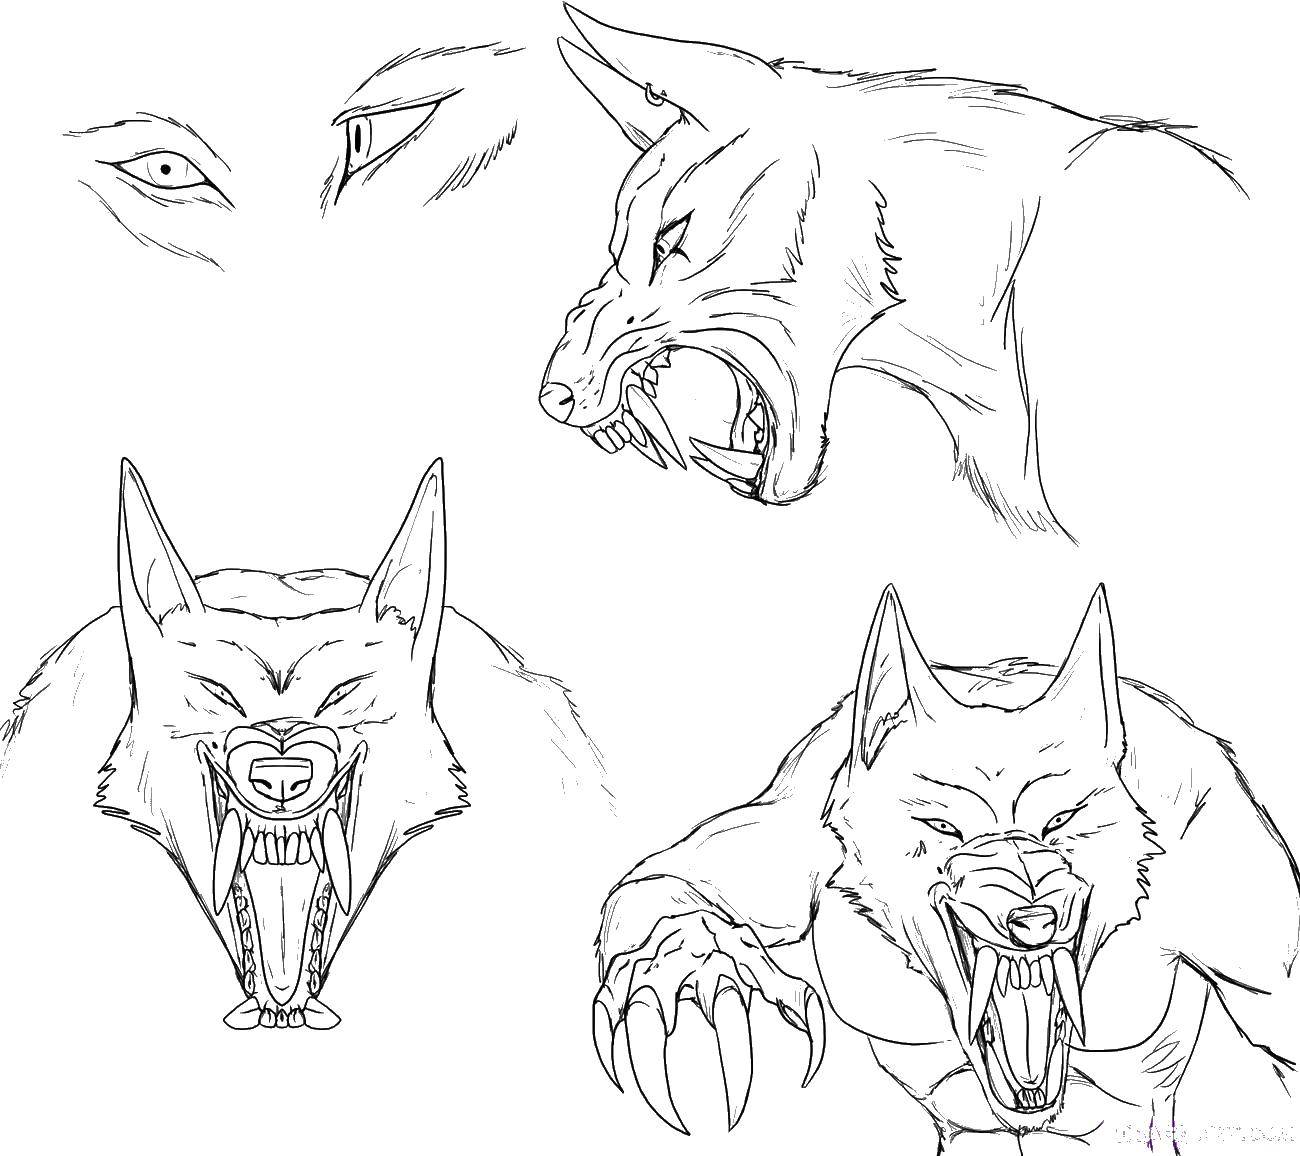 Coloring Draw a werewolf. Category Animals. Tags:  the werewolf.